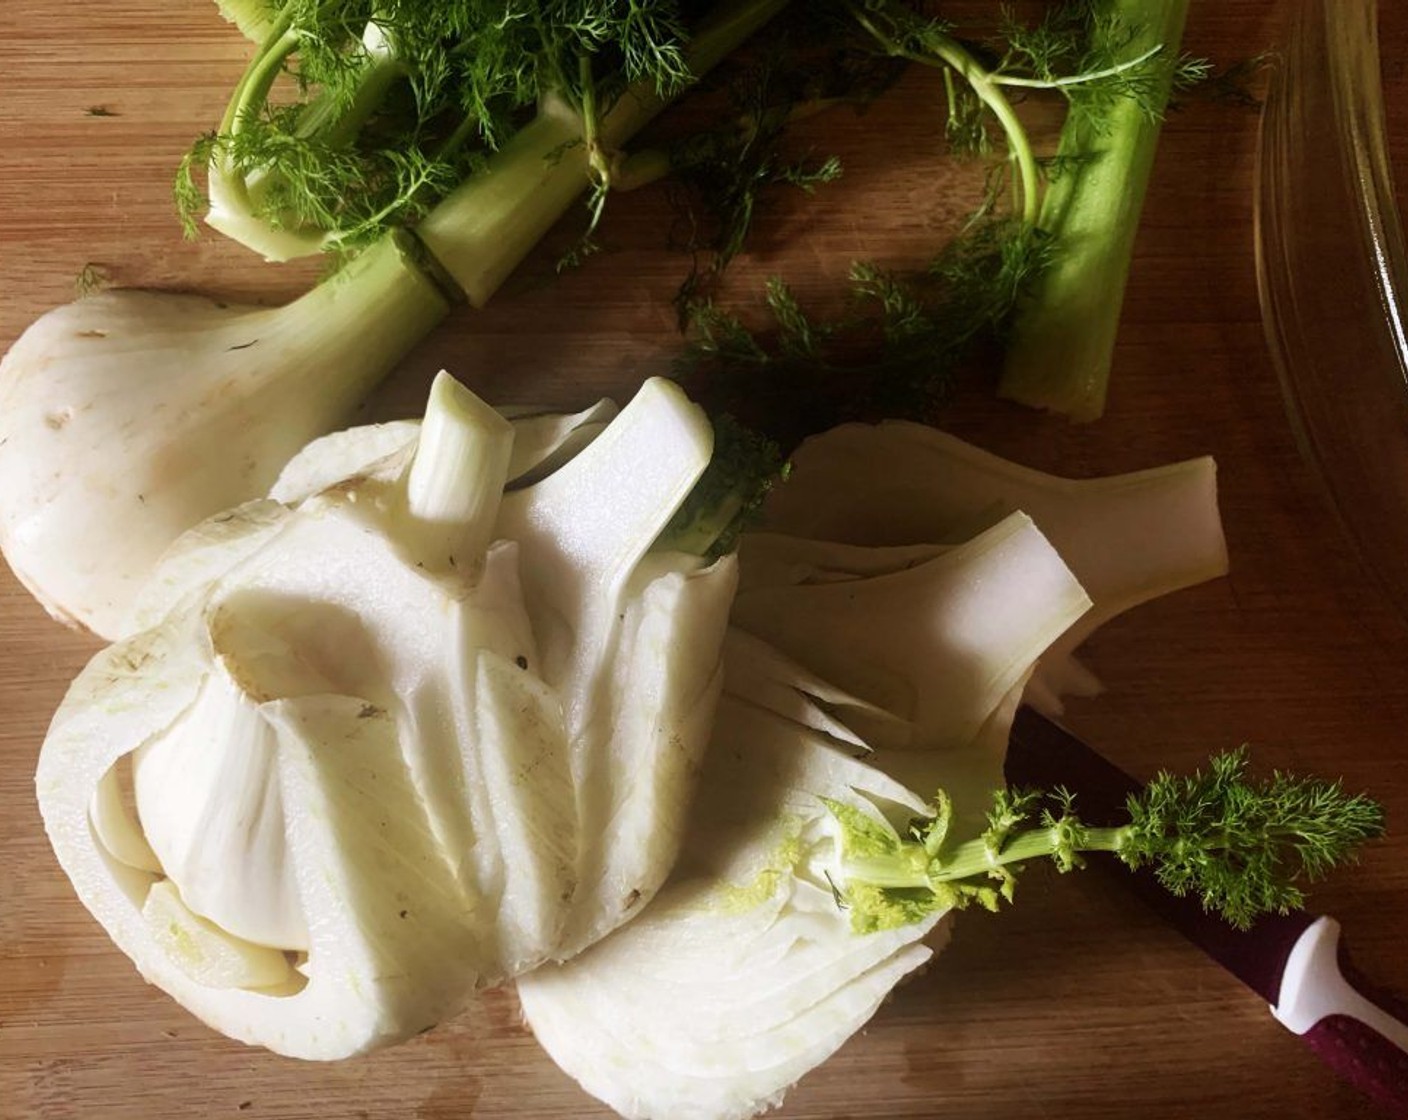 step 4 Wash and slice the Fennel Bulbs (2 bulbs) into slices which at not too thick, about 1/2-inch (1cm).